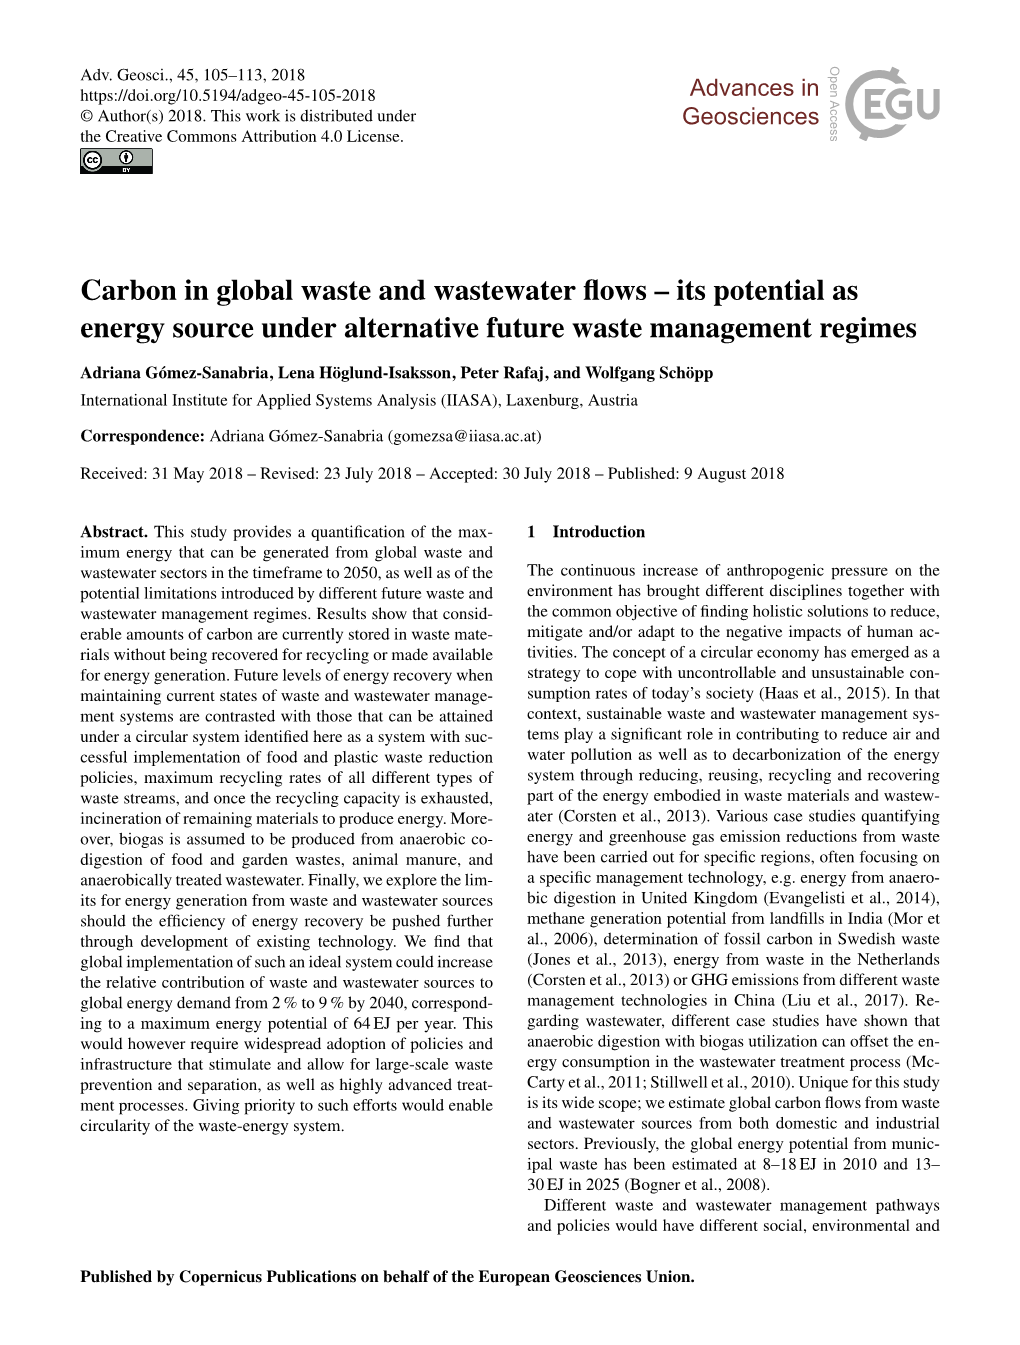 Carbon in Global Waste and Wastewater Flows – Its Potential As